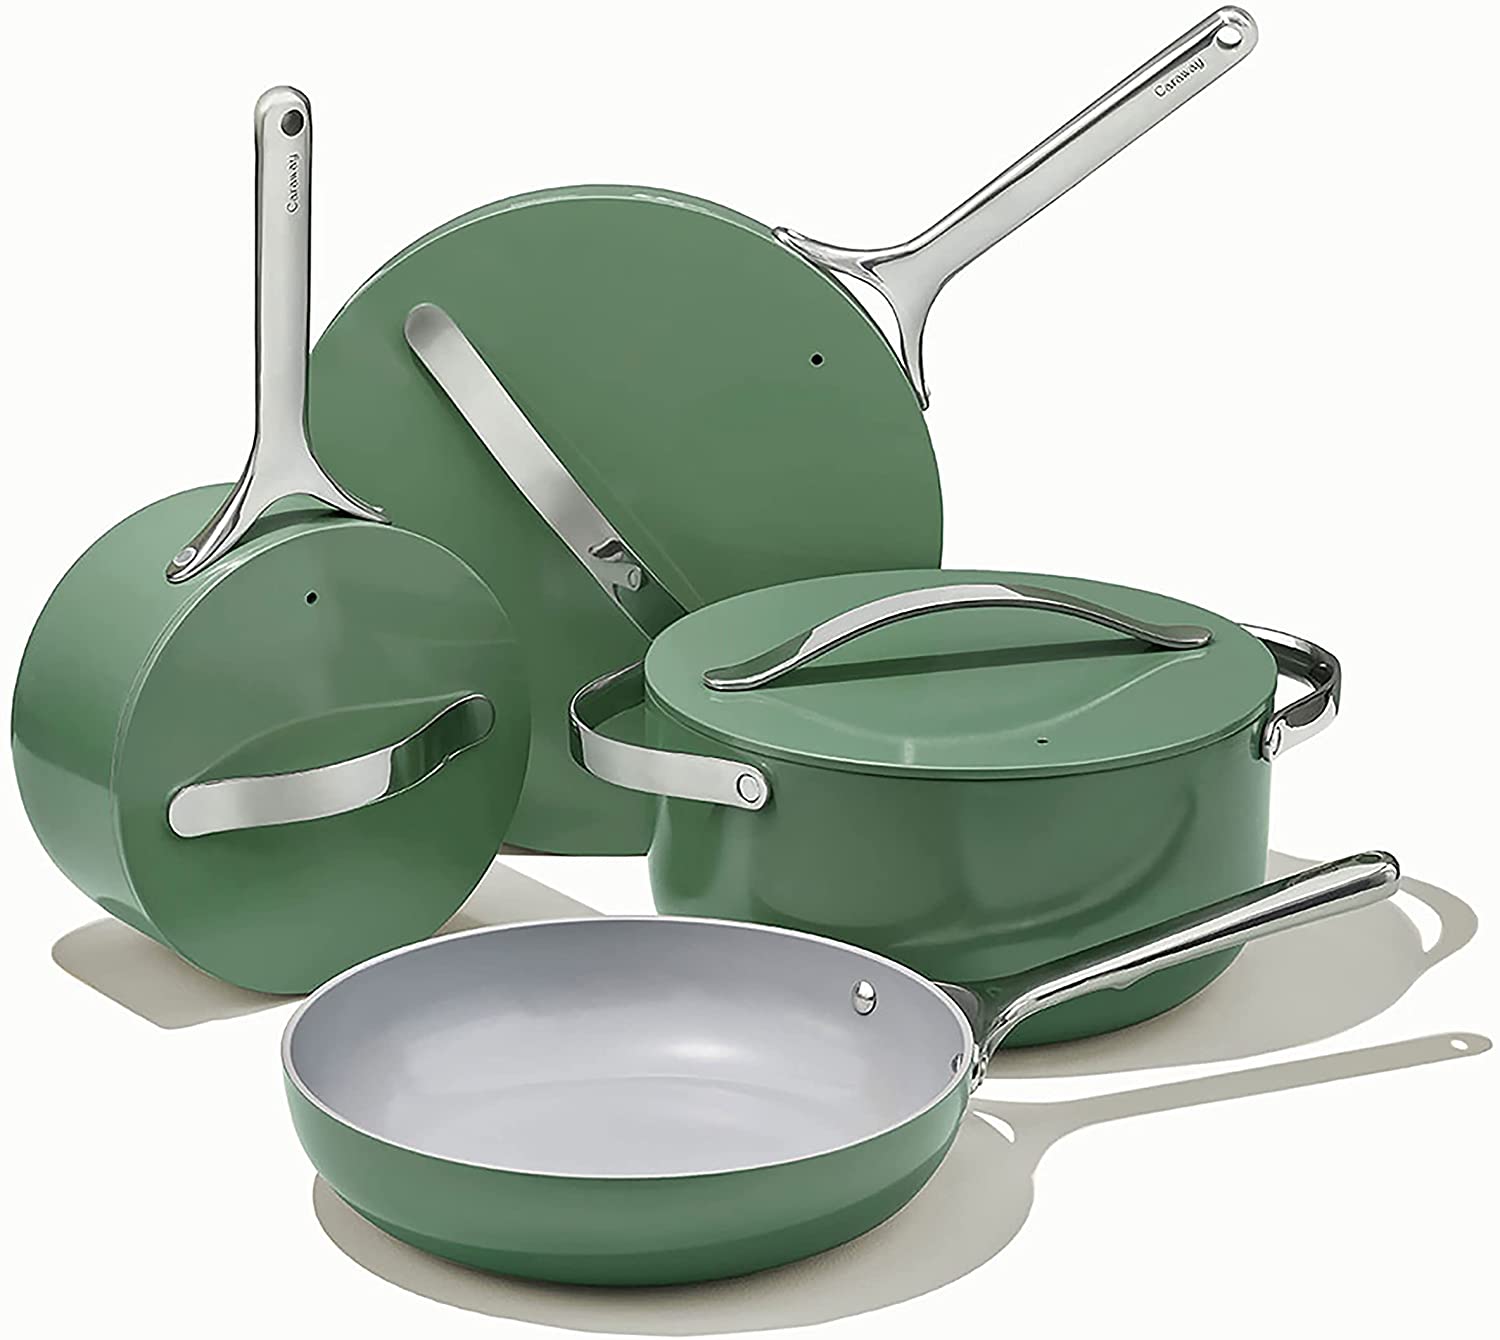 Caraway Non-Toxic and Non-Stick Cookware Set in Sage – Premium